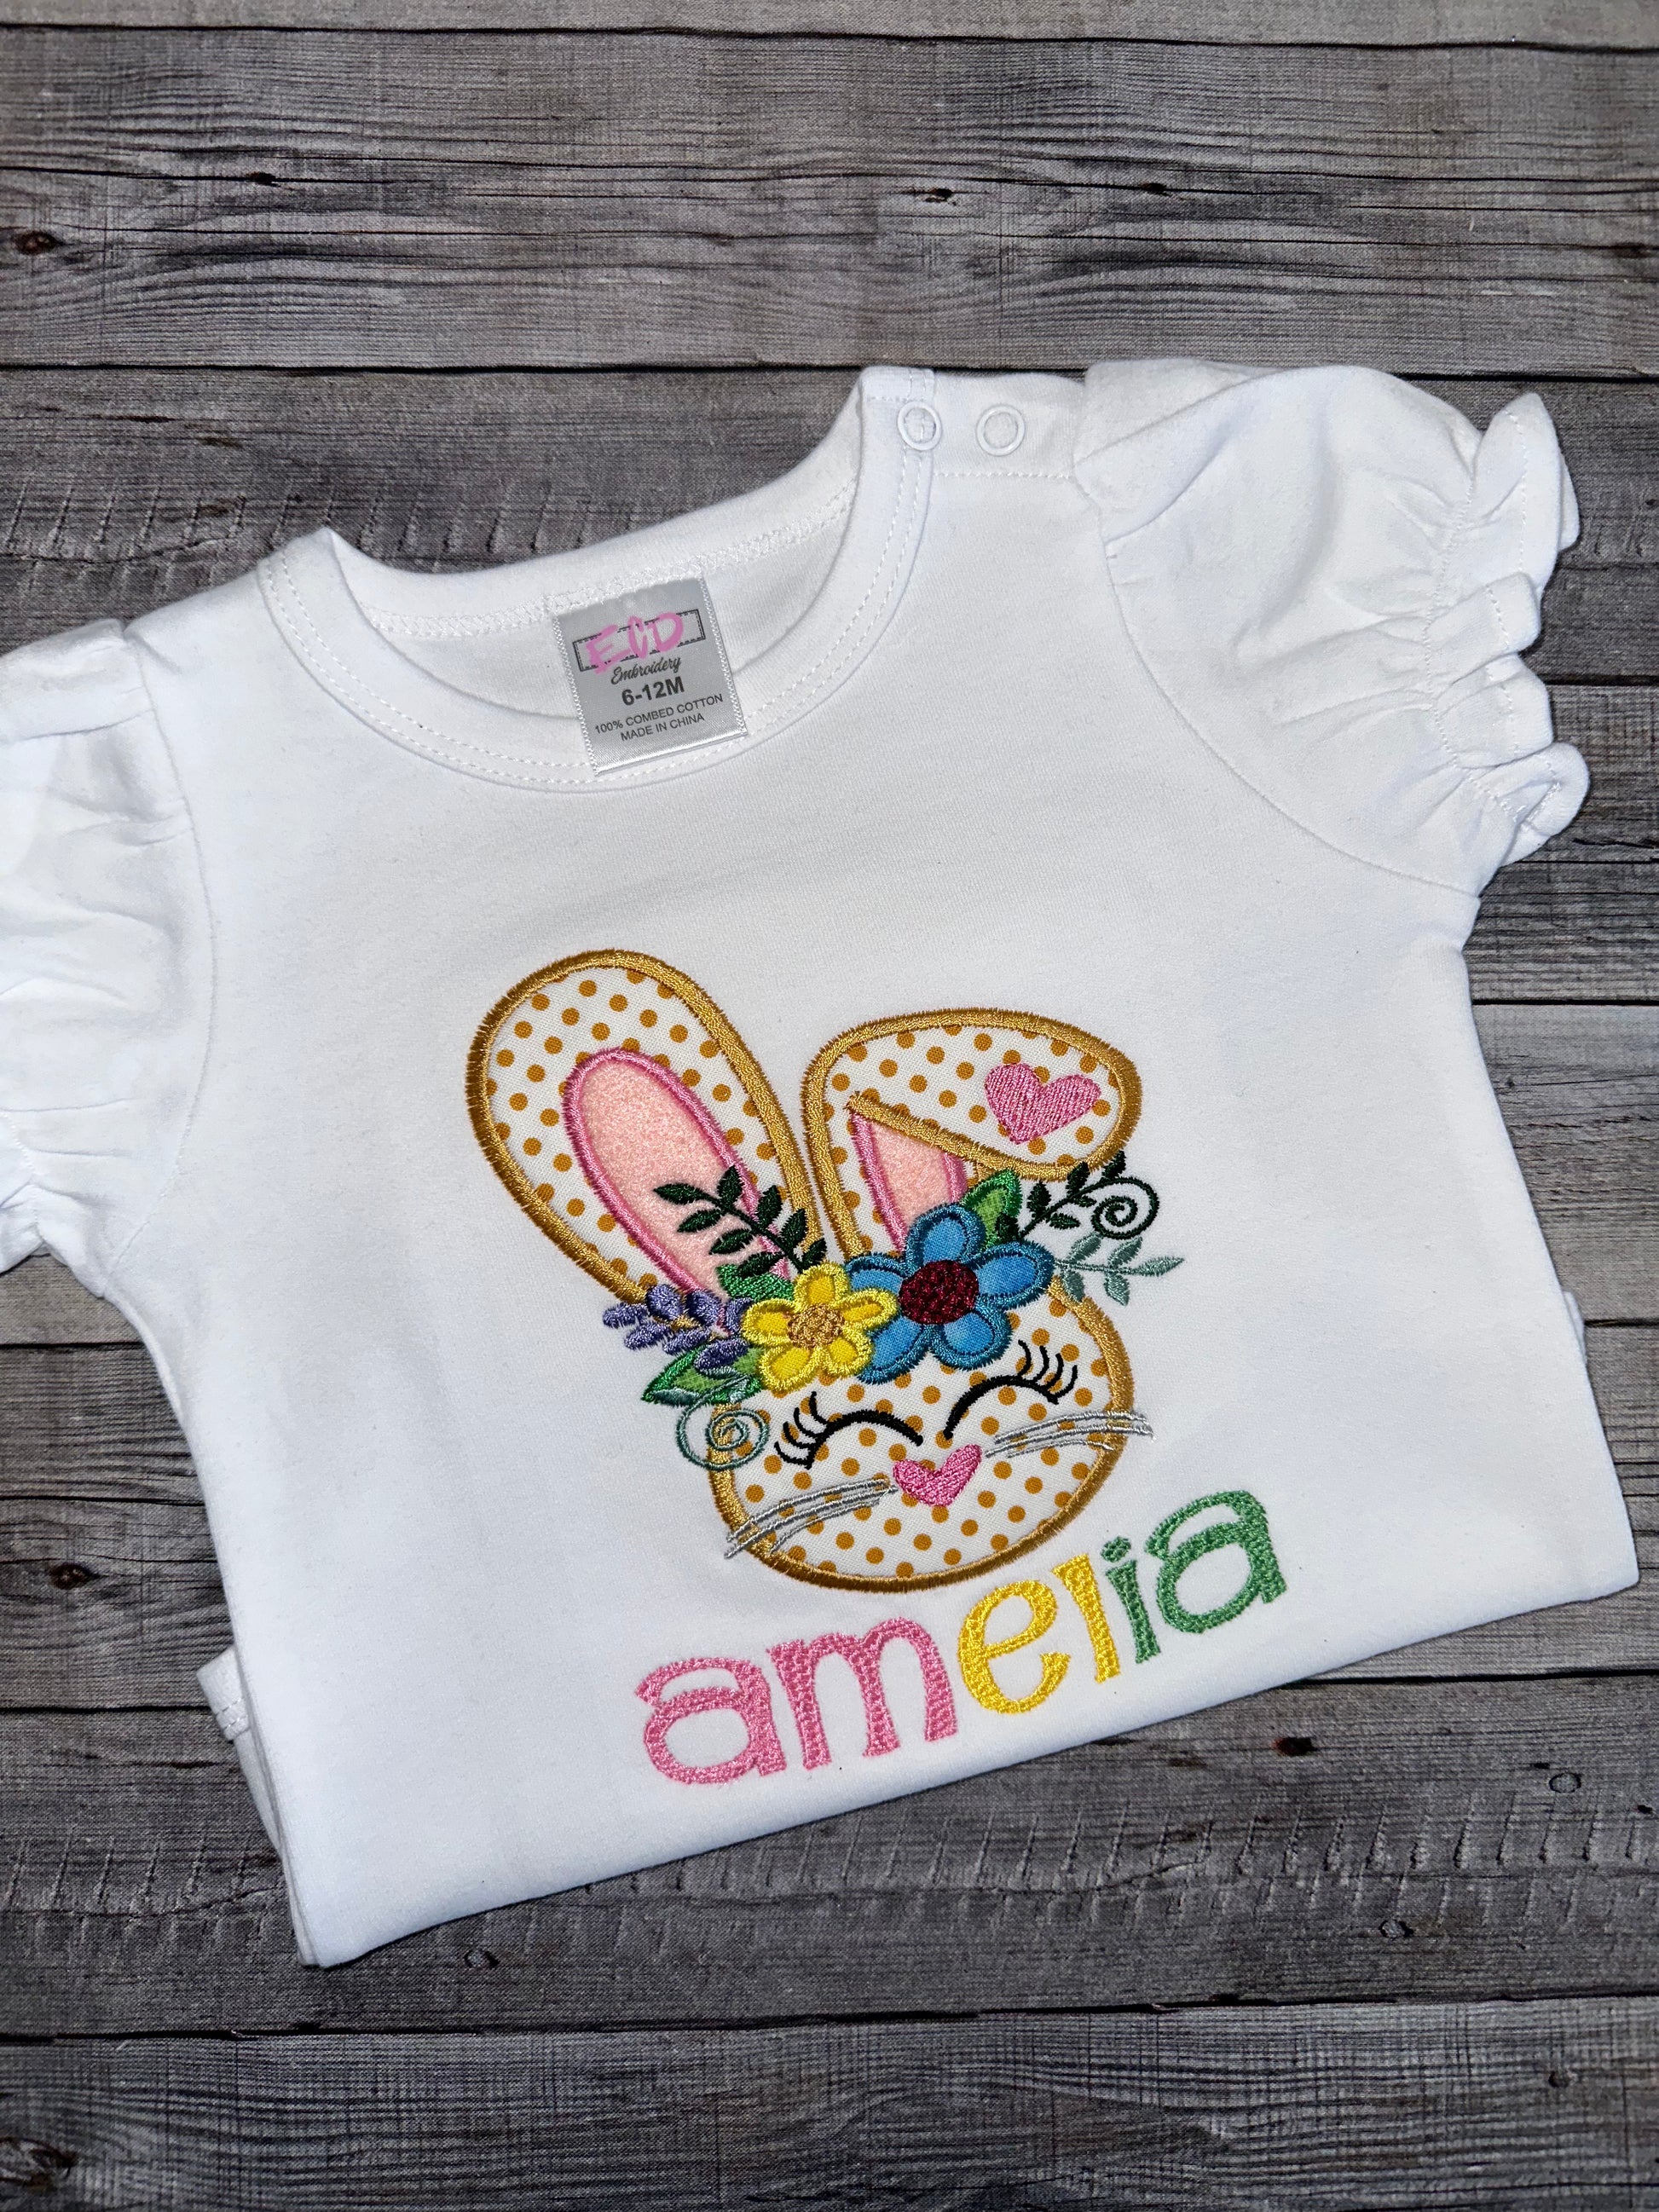 Personalized Easter bunny shirt. Easter holiday theme shirt. Easter holiday ideas and theme